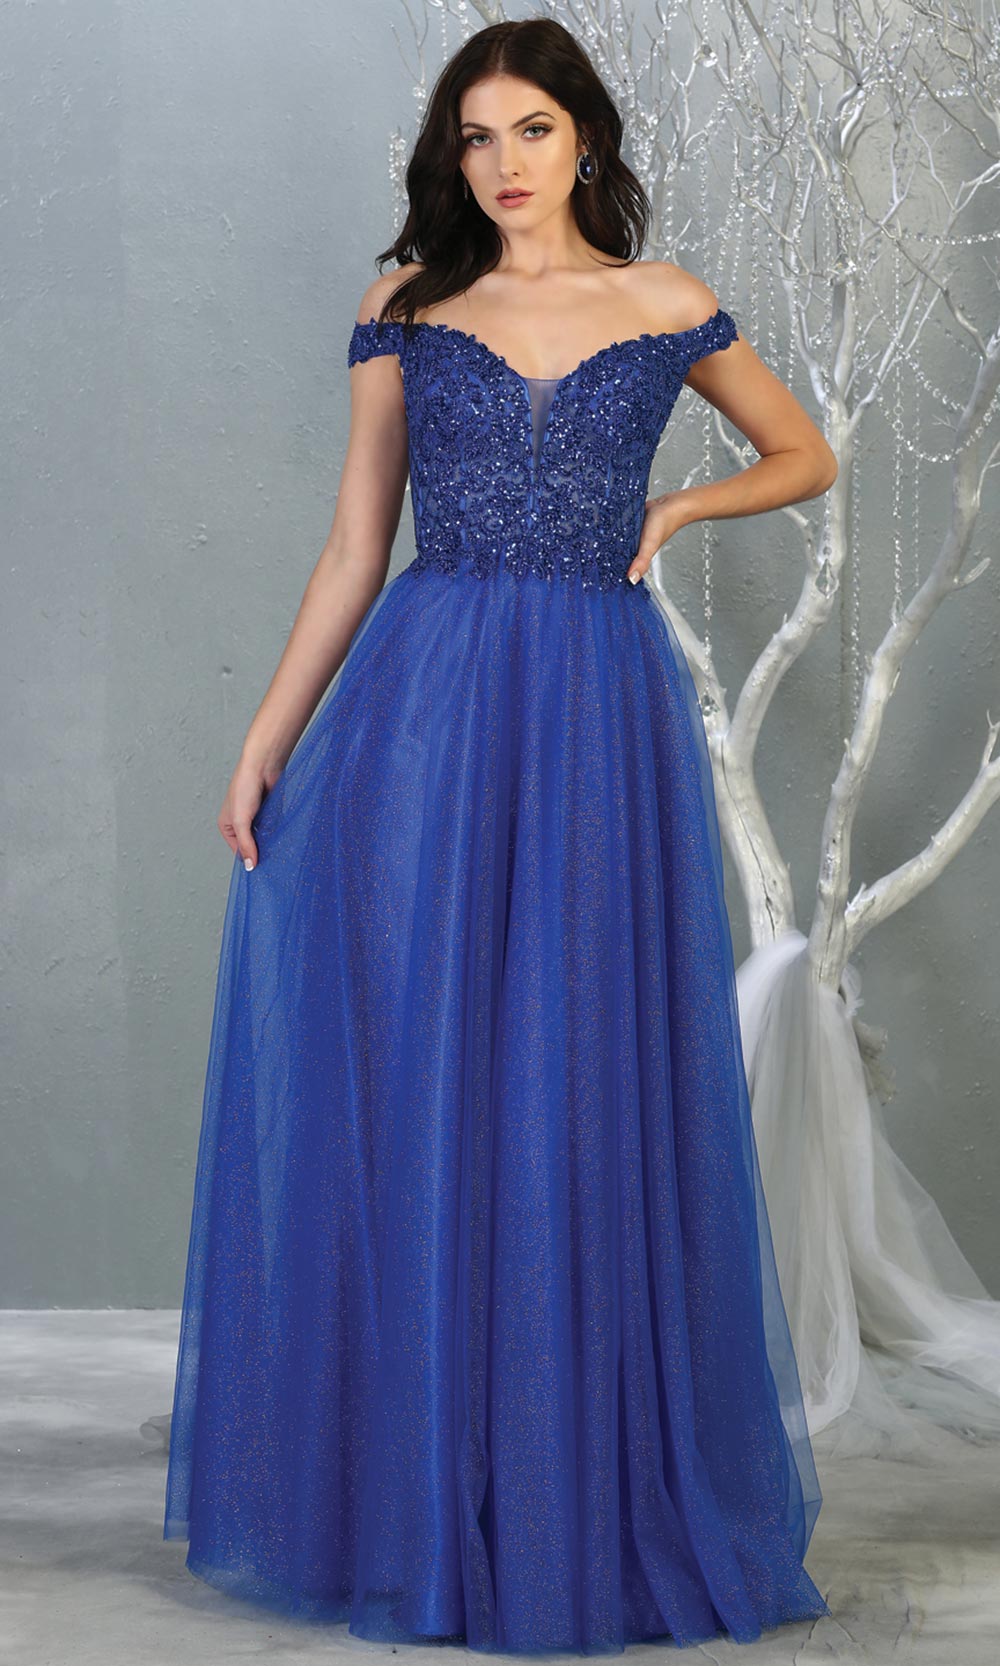 Buy M.R.A Fashion New Girl's Satin Long Gown (8748, Blue, 5-6 Years) at